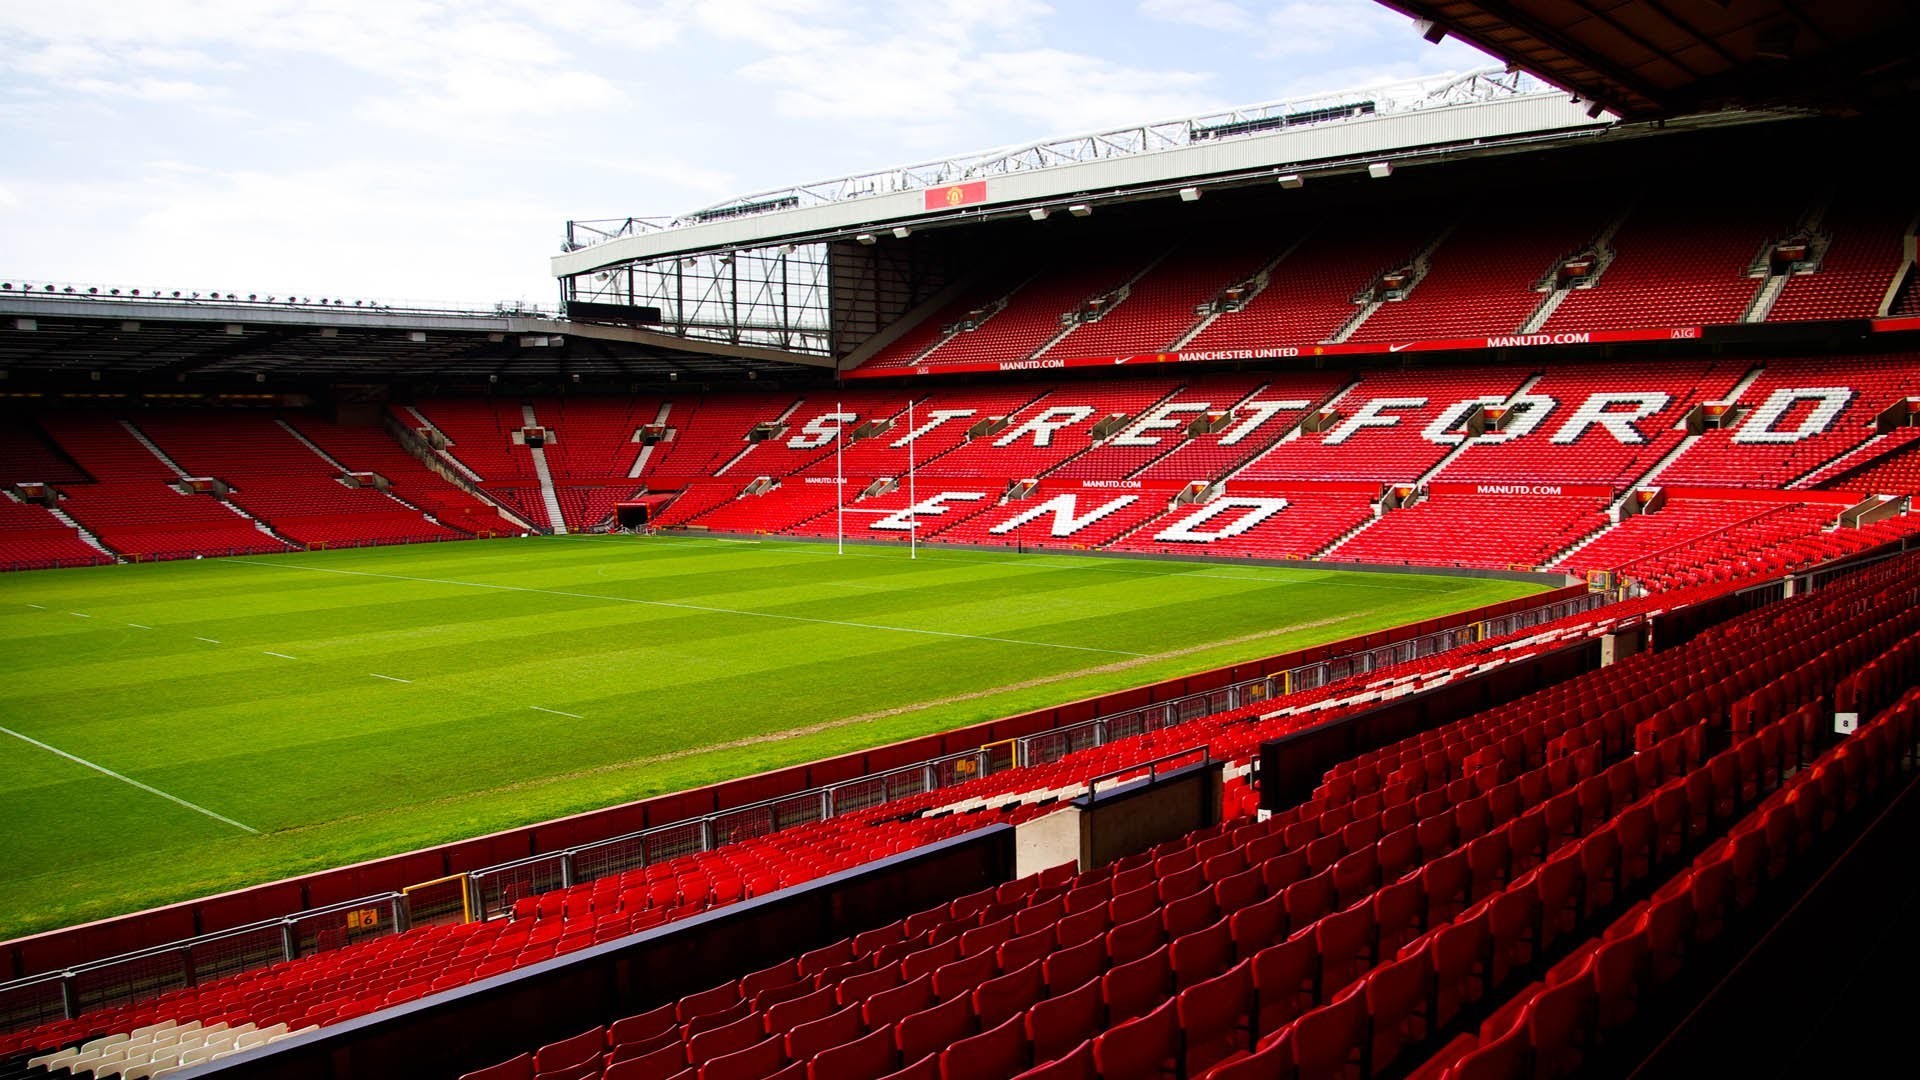 hinh nen manchester united 29 - wallpaper free download